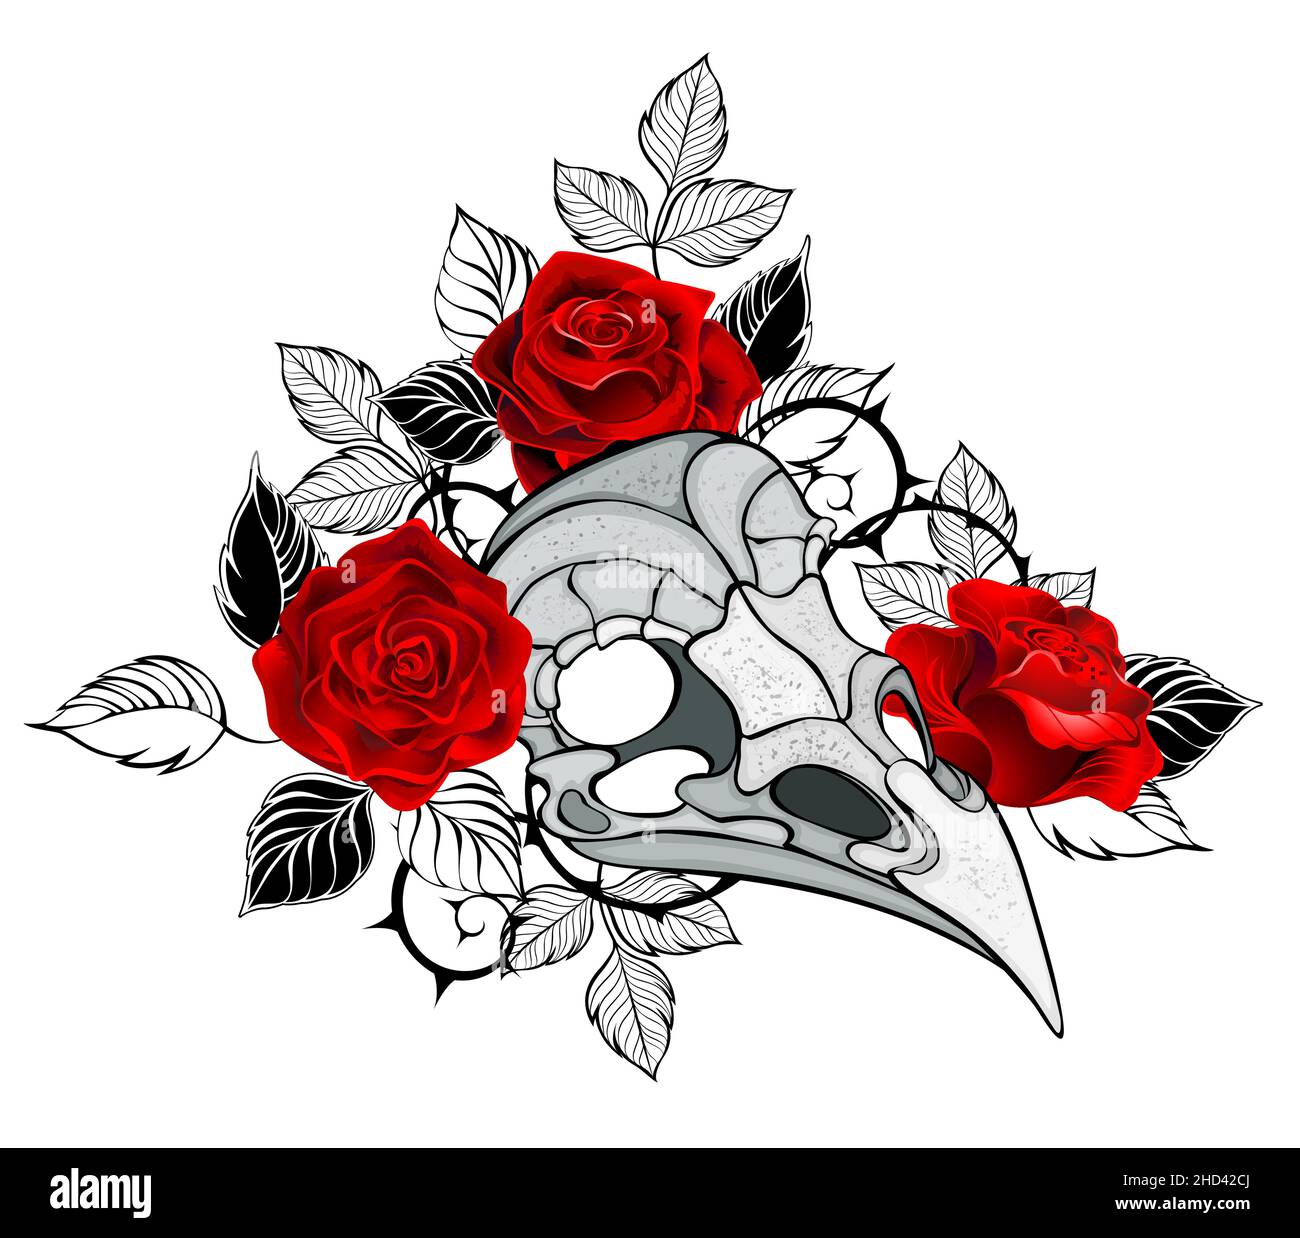 Gray, gothic, textured, bird's skull, decorated with bright, red, blooming roses with black leaves and stems on a white background. Gothic style. Stock Vector